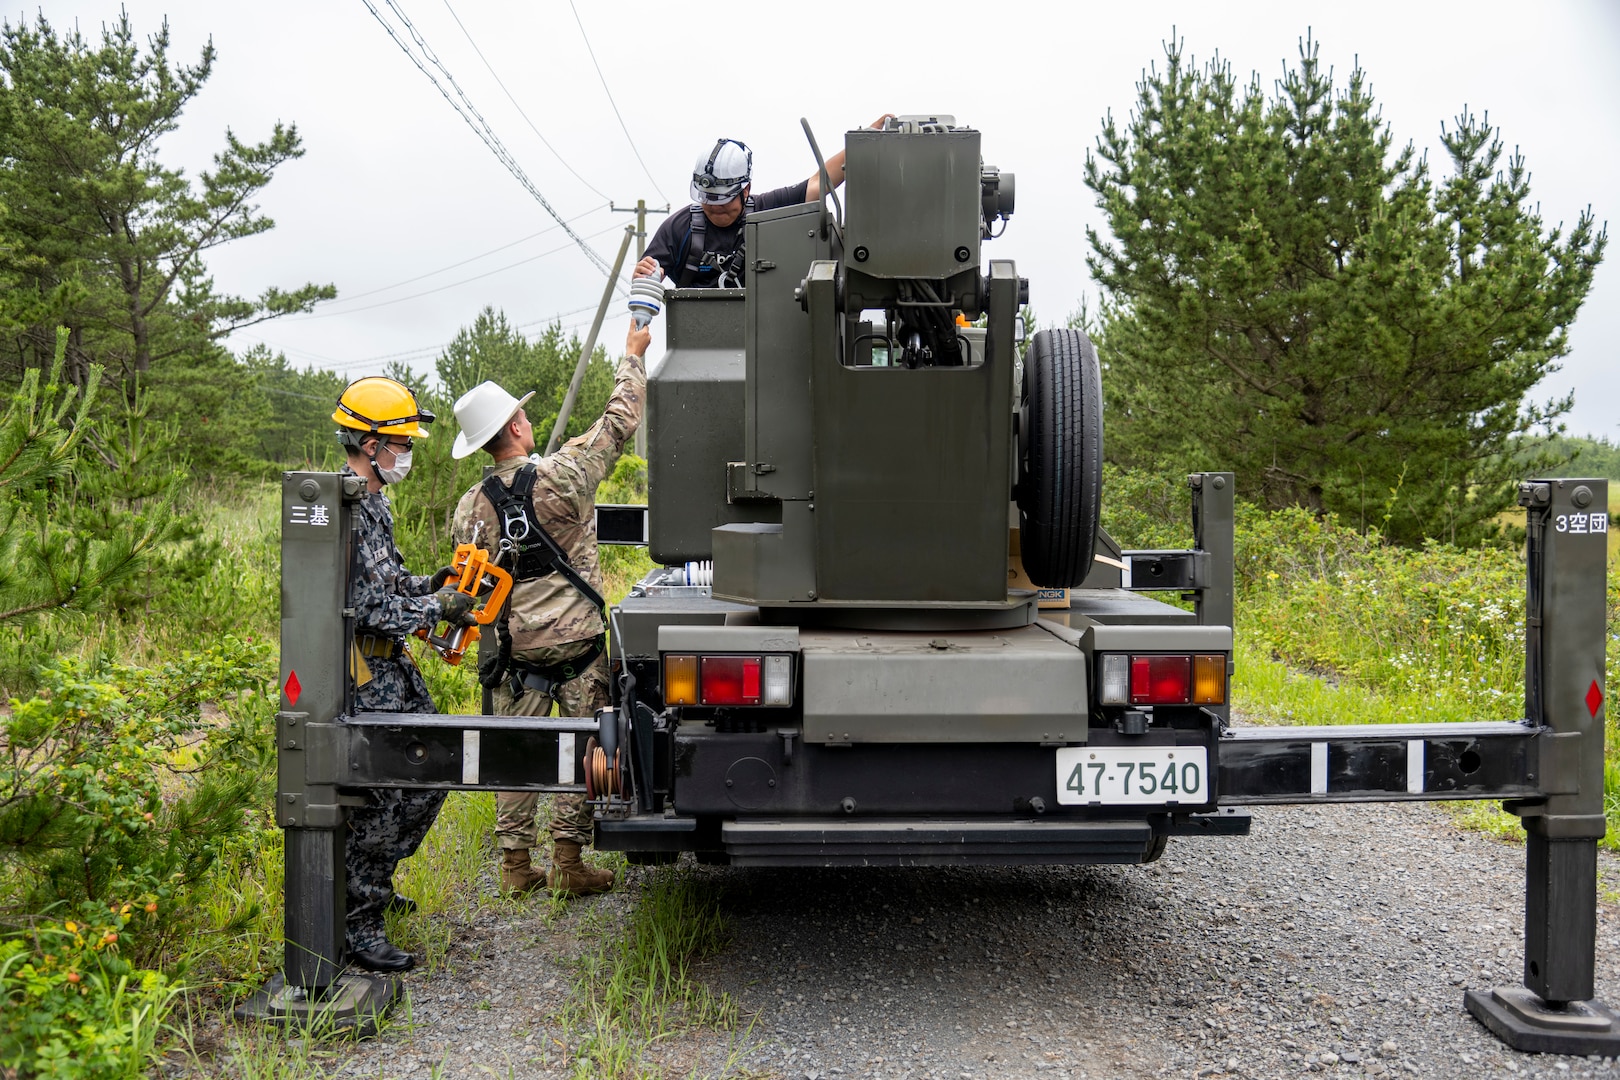 35 CES teams up with JASDF counterparts to replace power lines at Draughon Range